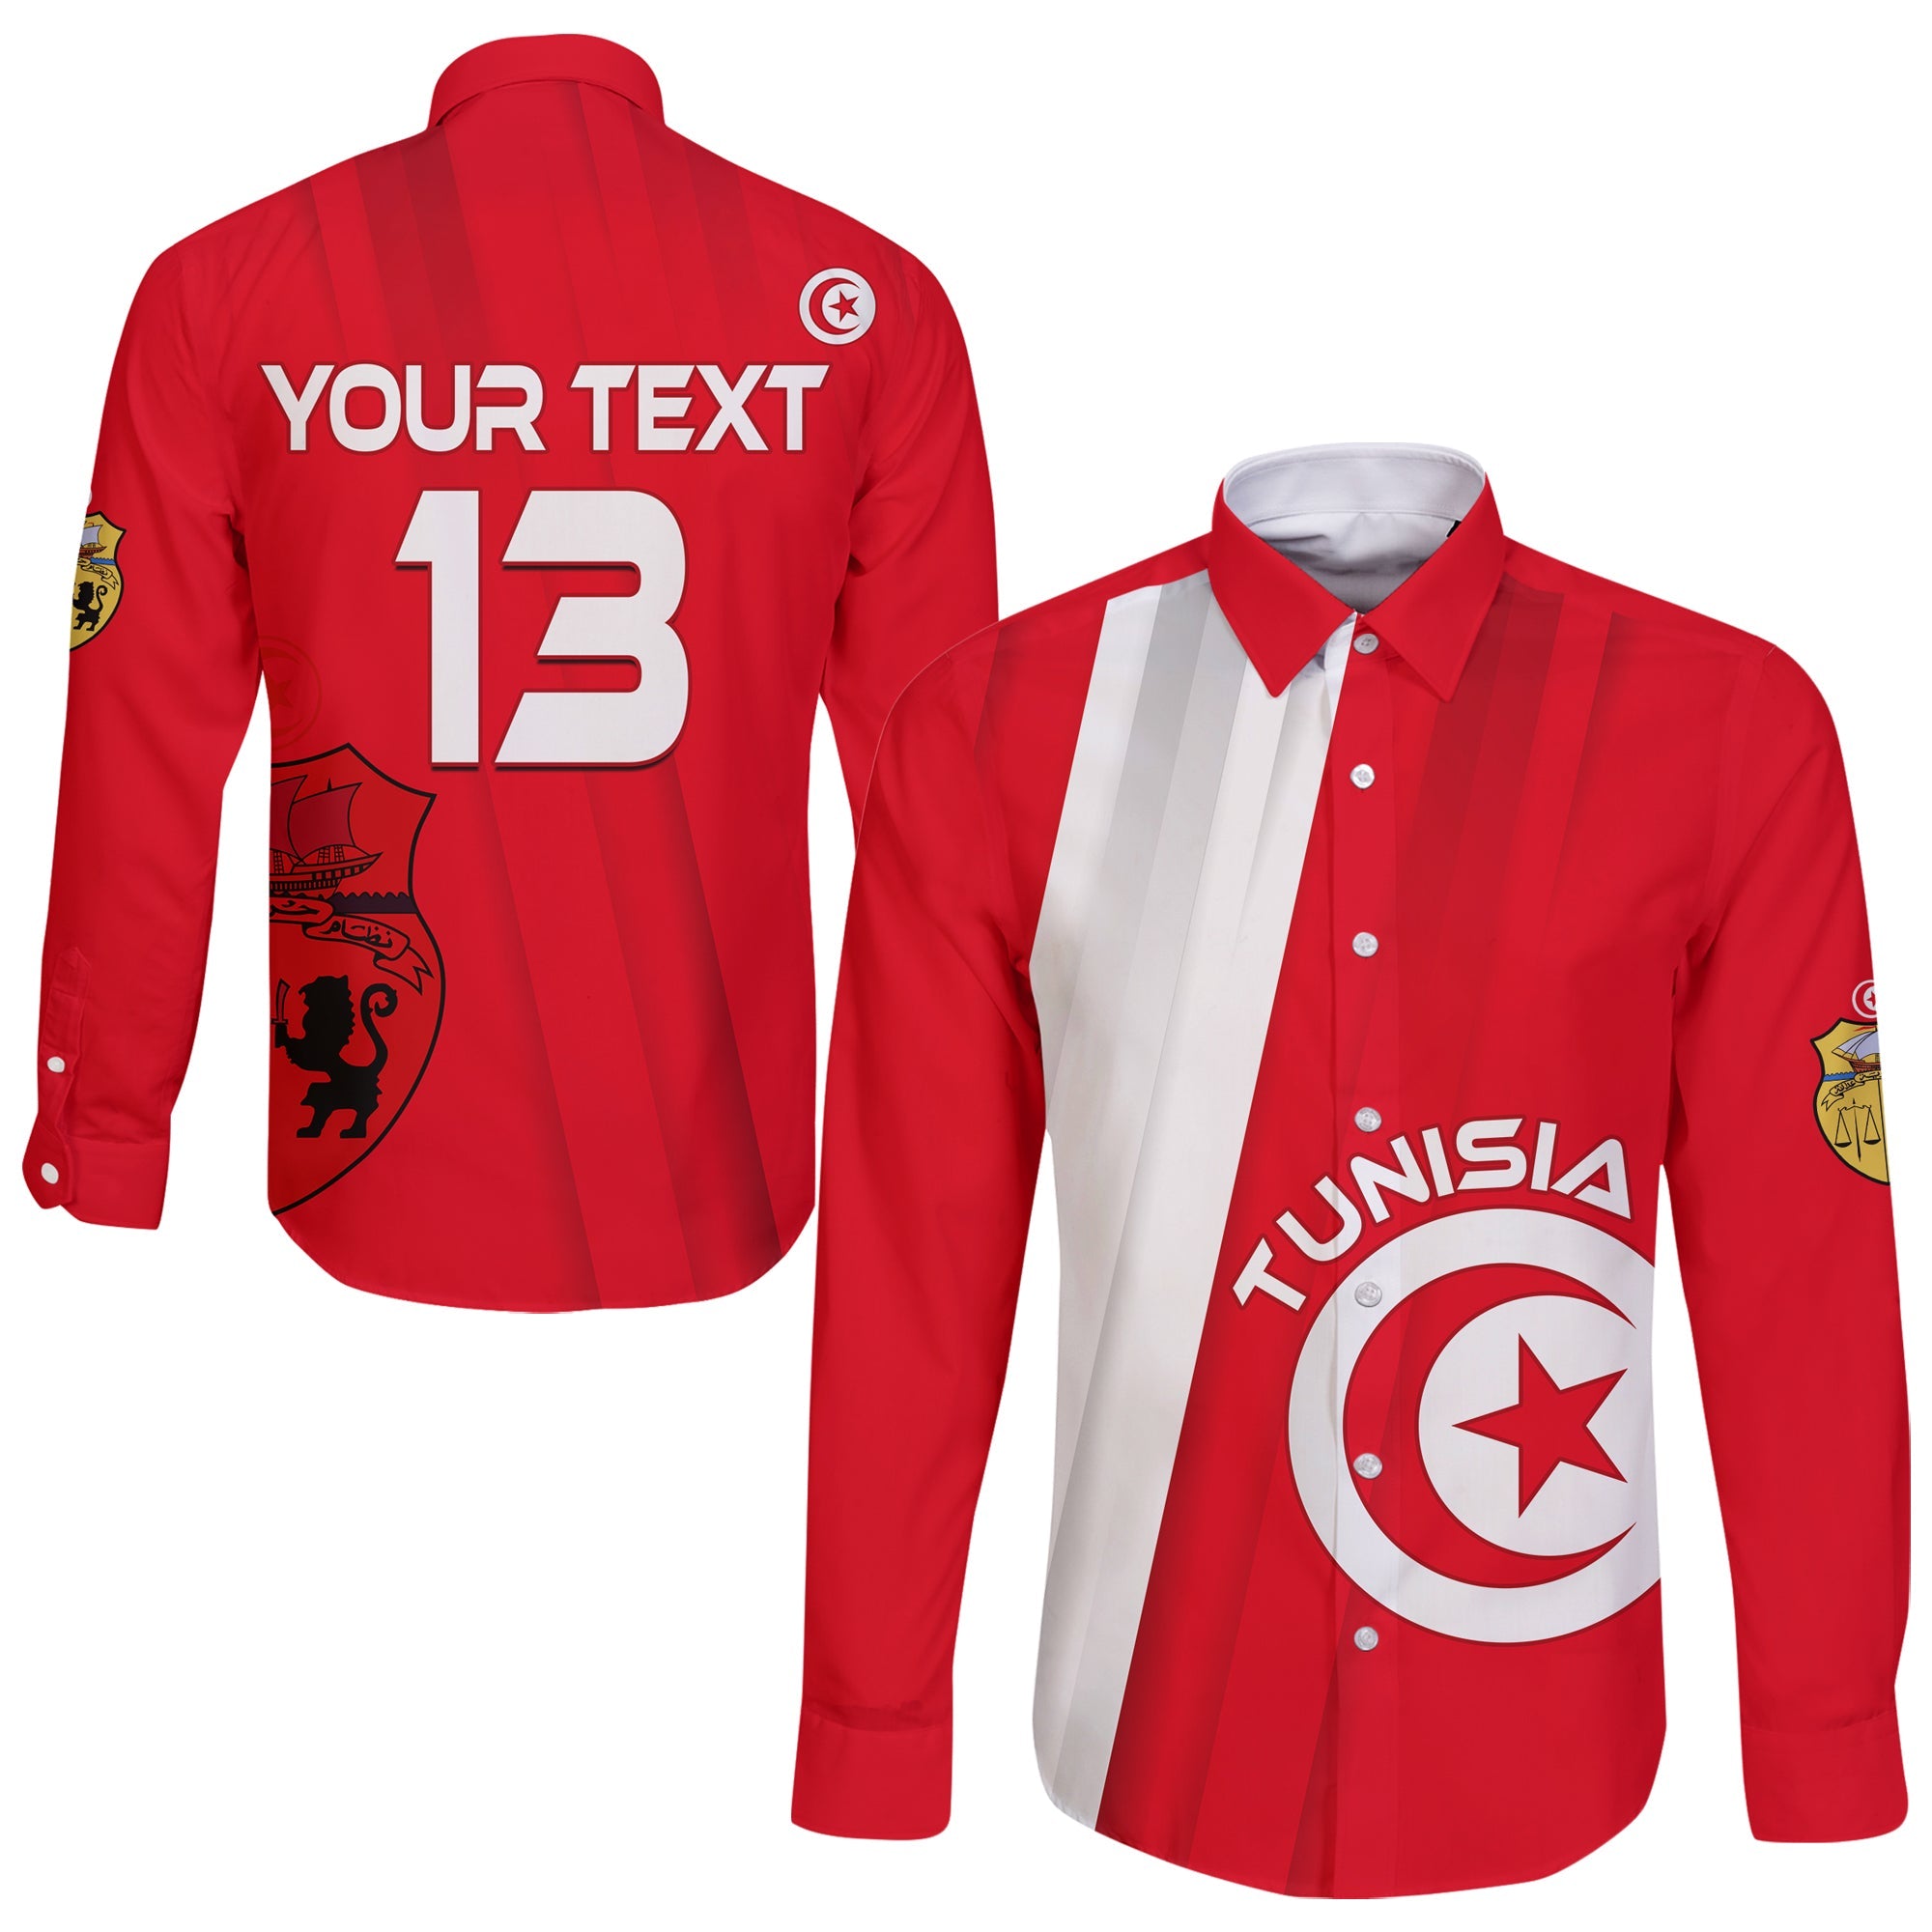 custom-text-and-number-tunisia-hawaii-long-sleeve-button-shirt-always-in-my-heart